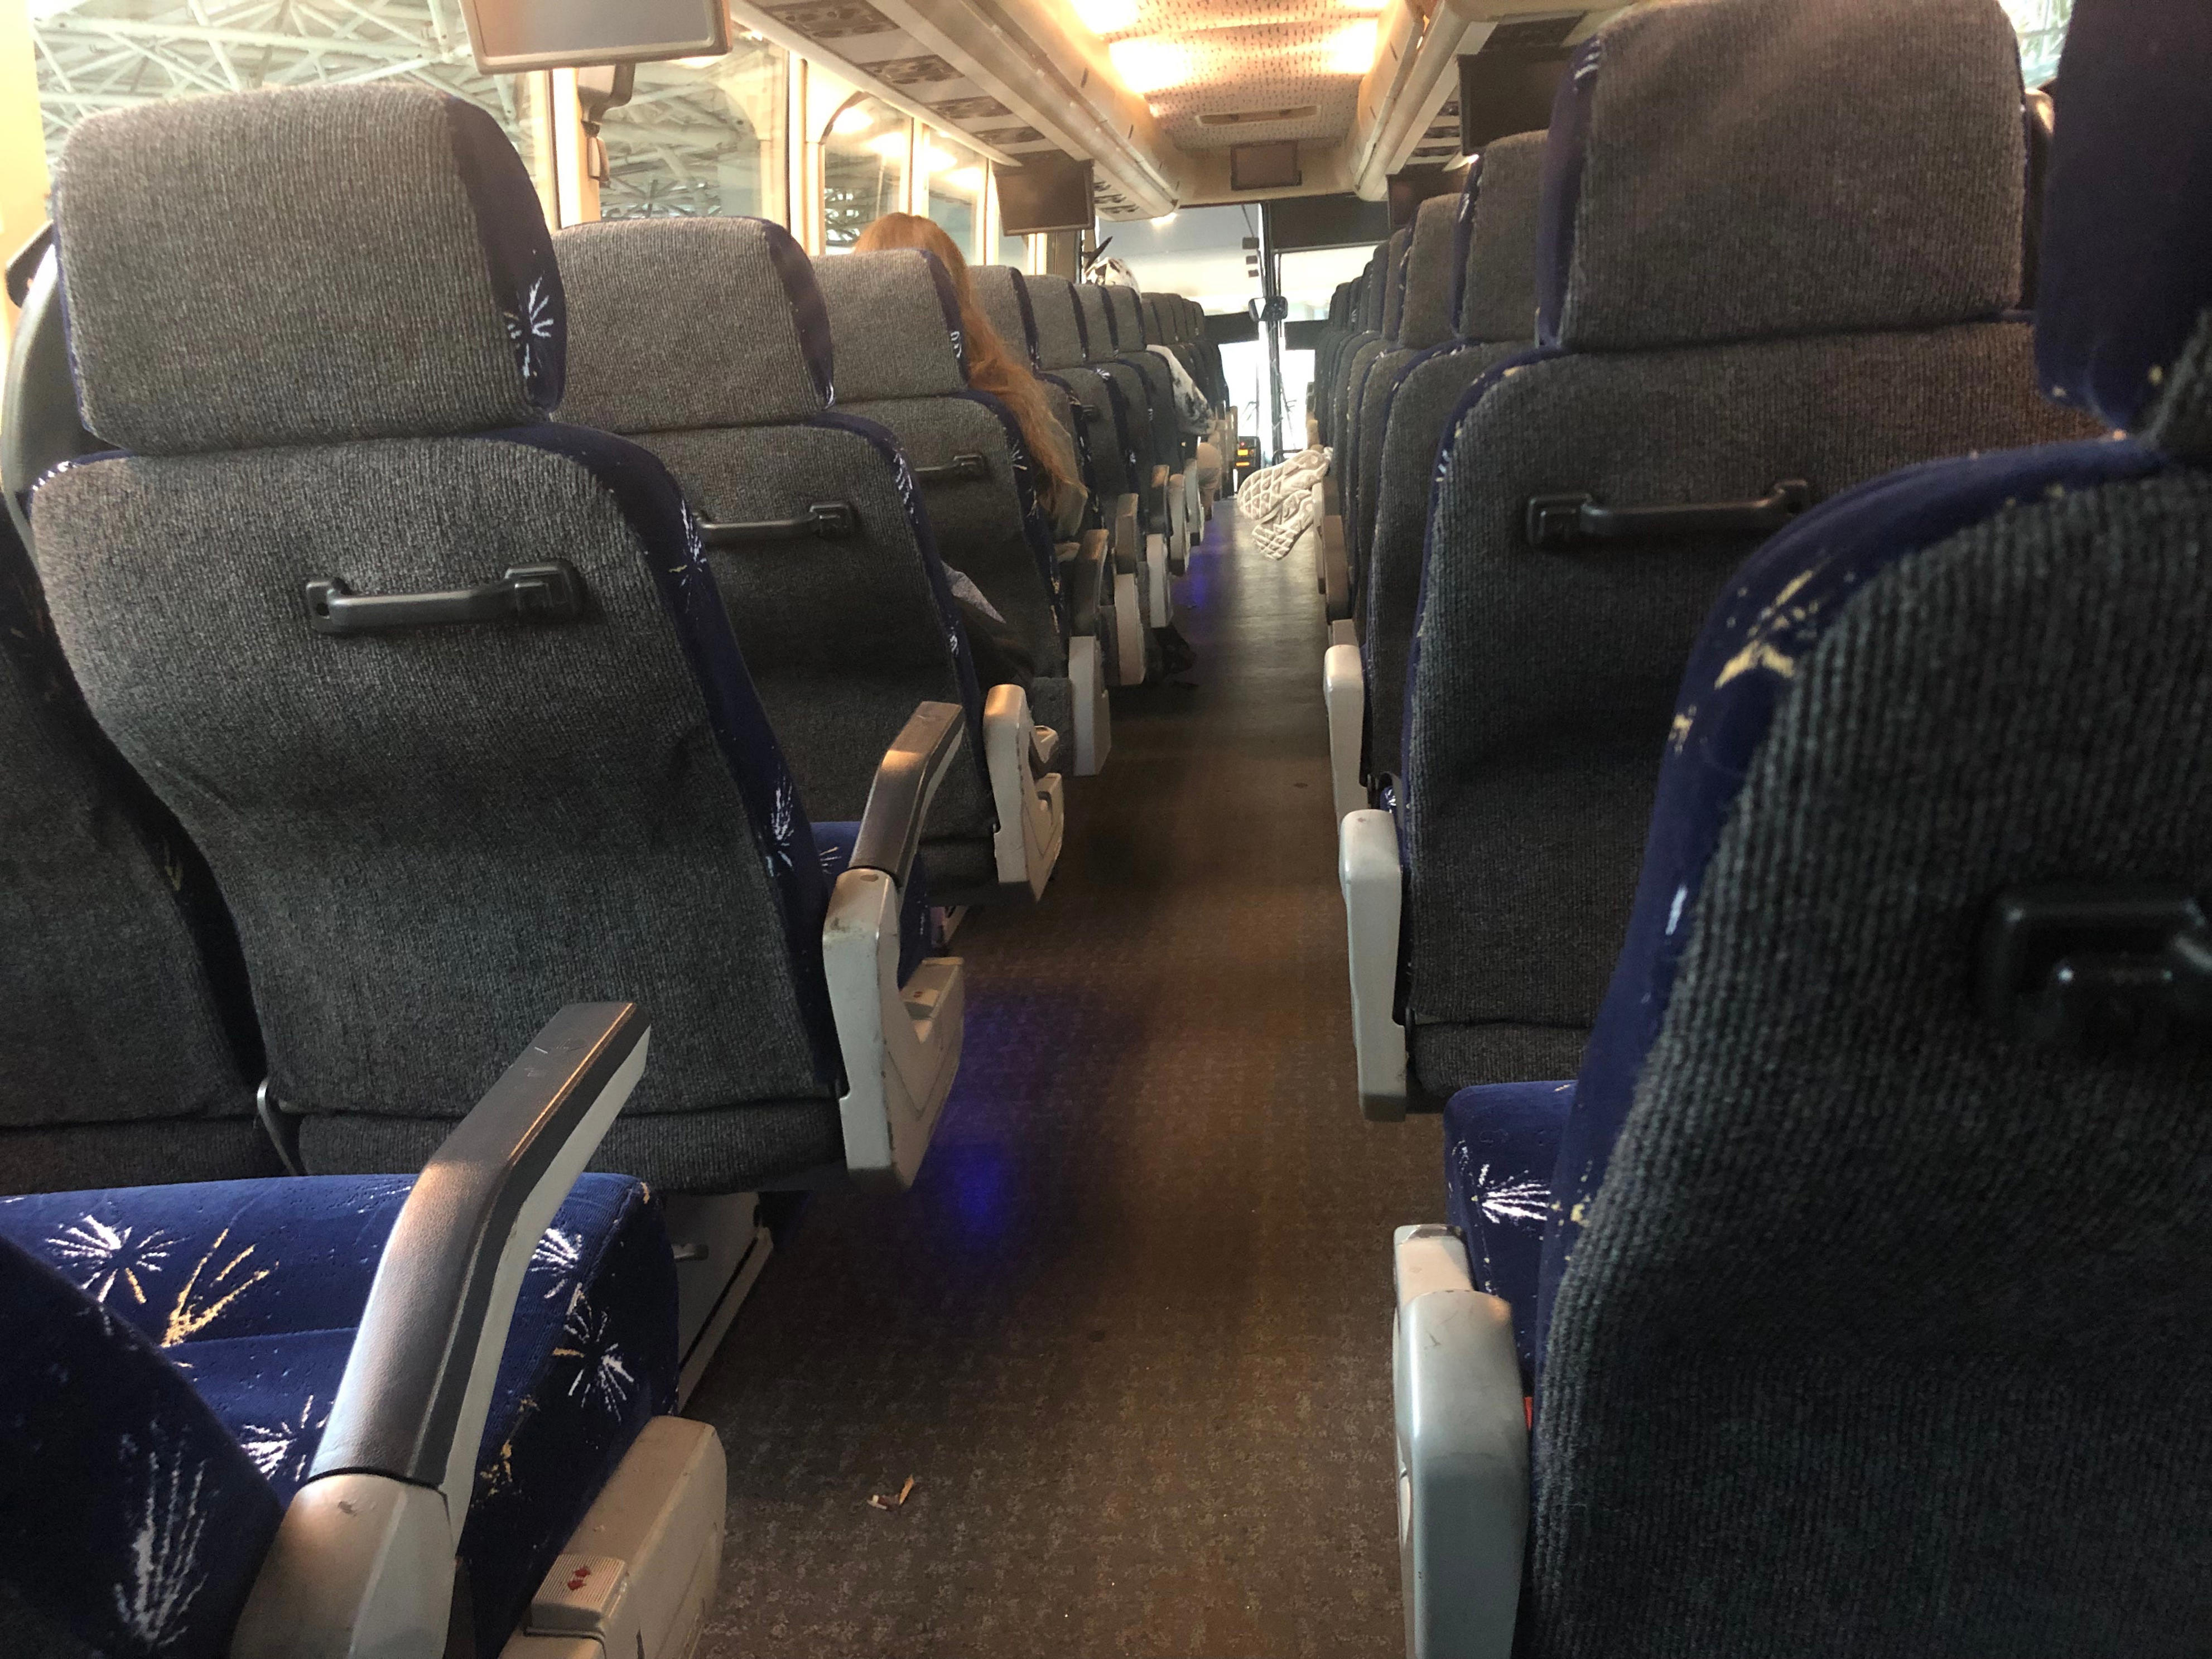 <p>The route from Miami to Naples wasn't crowded. </p><p>I sat in my assigned seat at the back of the bus, and there wasn't anyone in my row or near me.</p><p>Having this extra space made the ride even more enjoyable.</p>